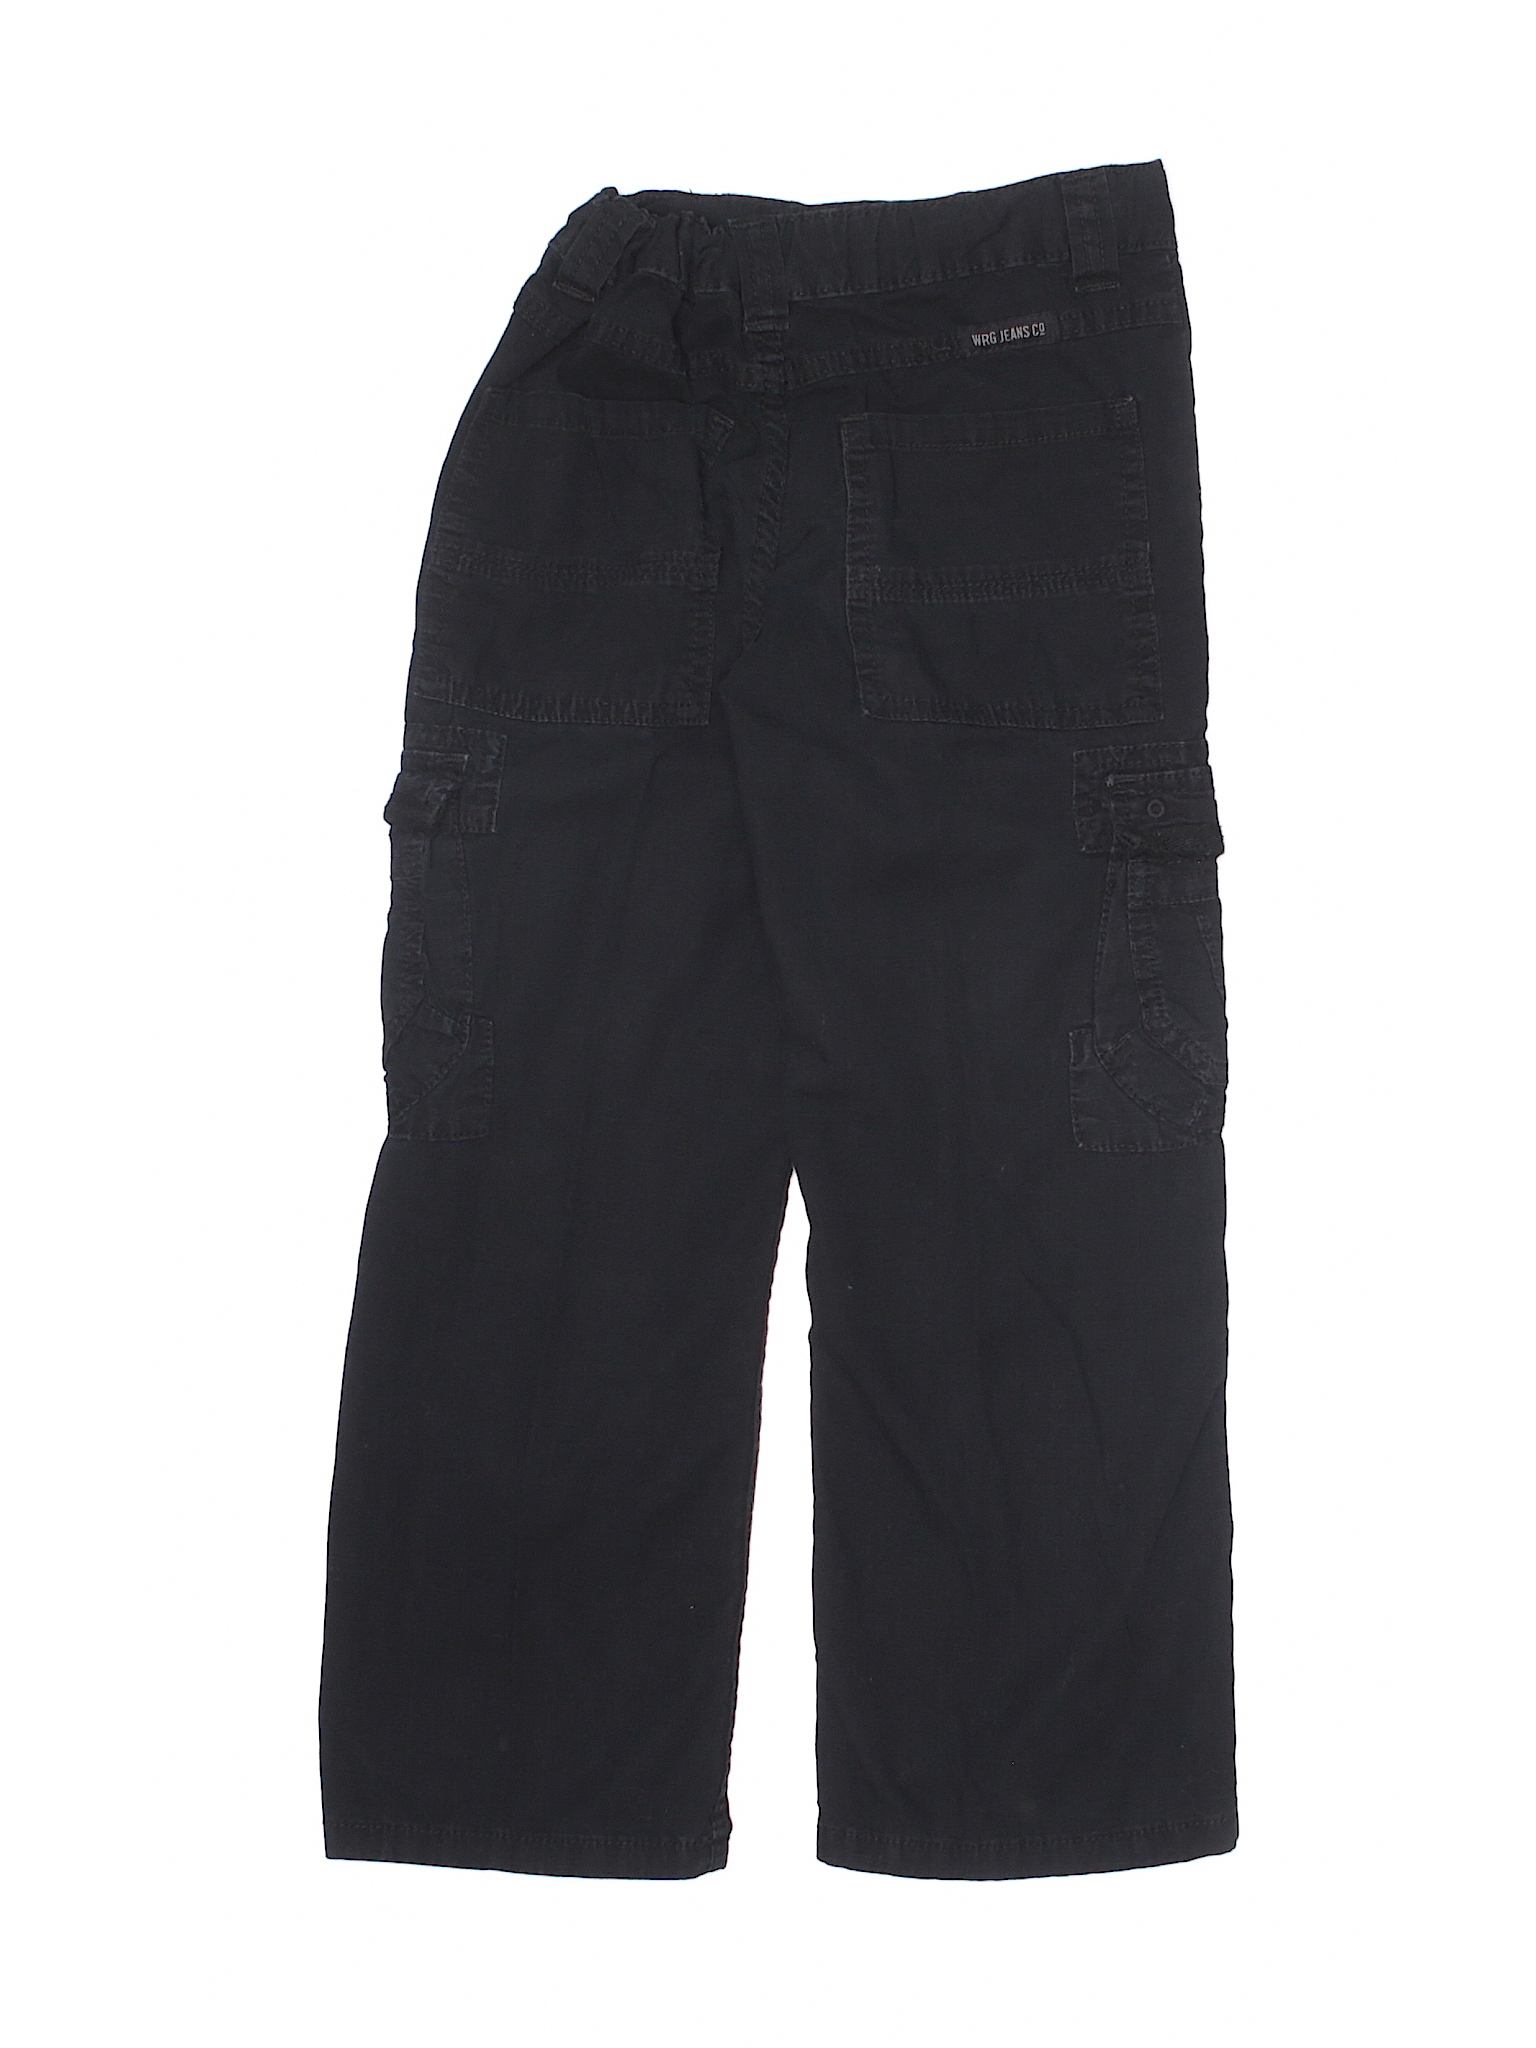 wrg jeans co cargo shorts